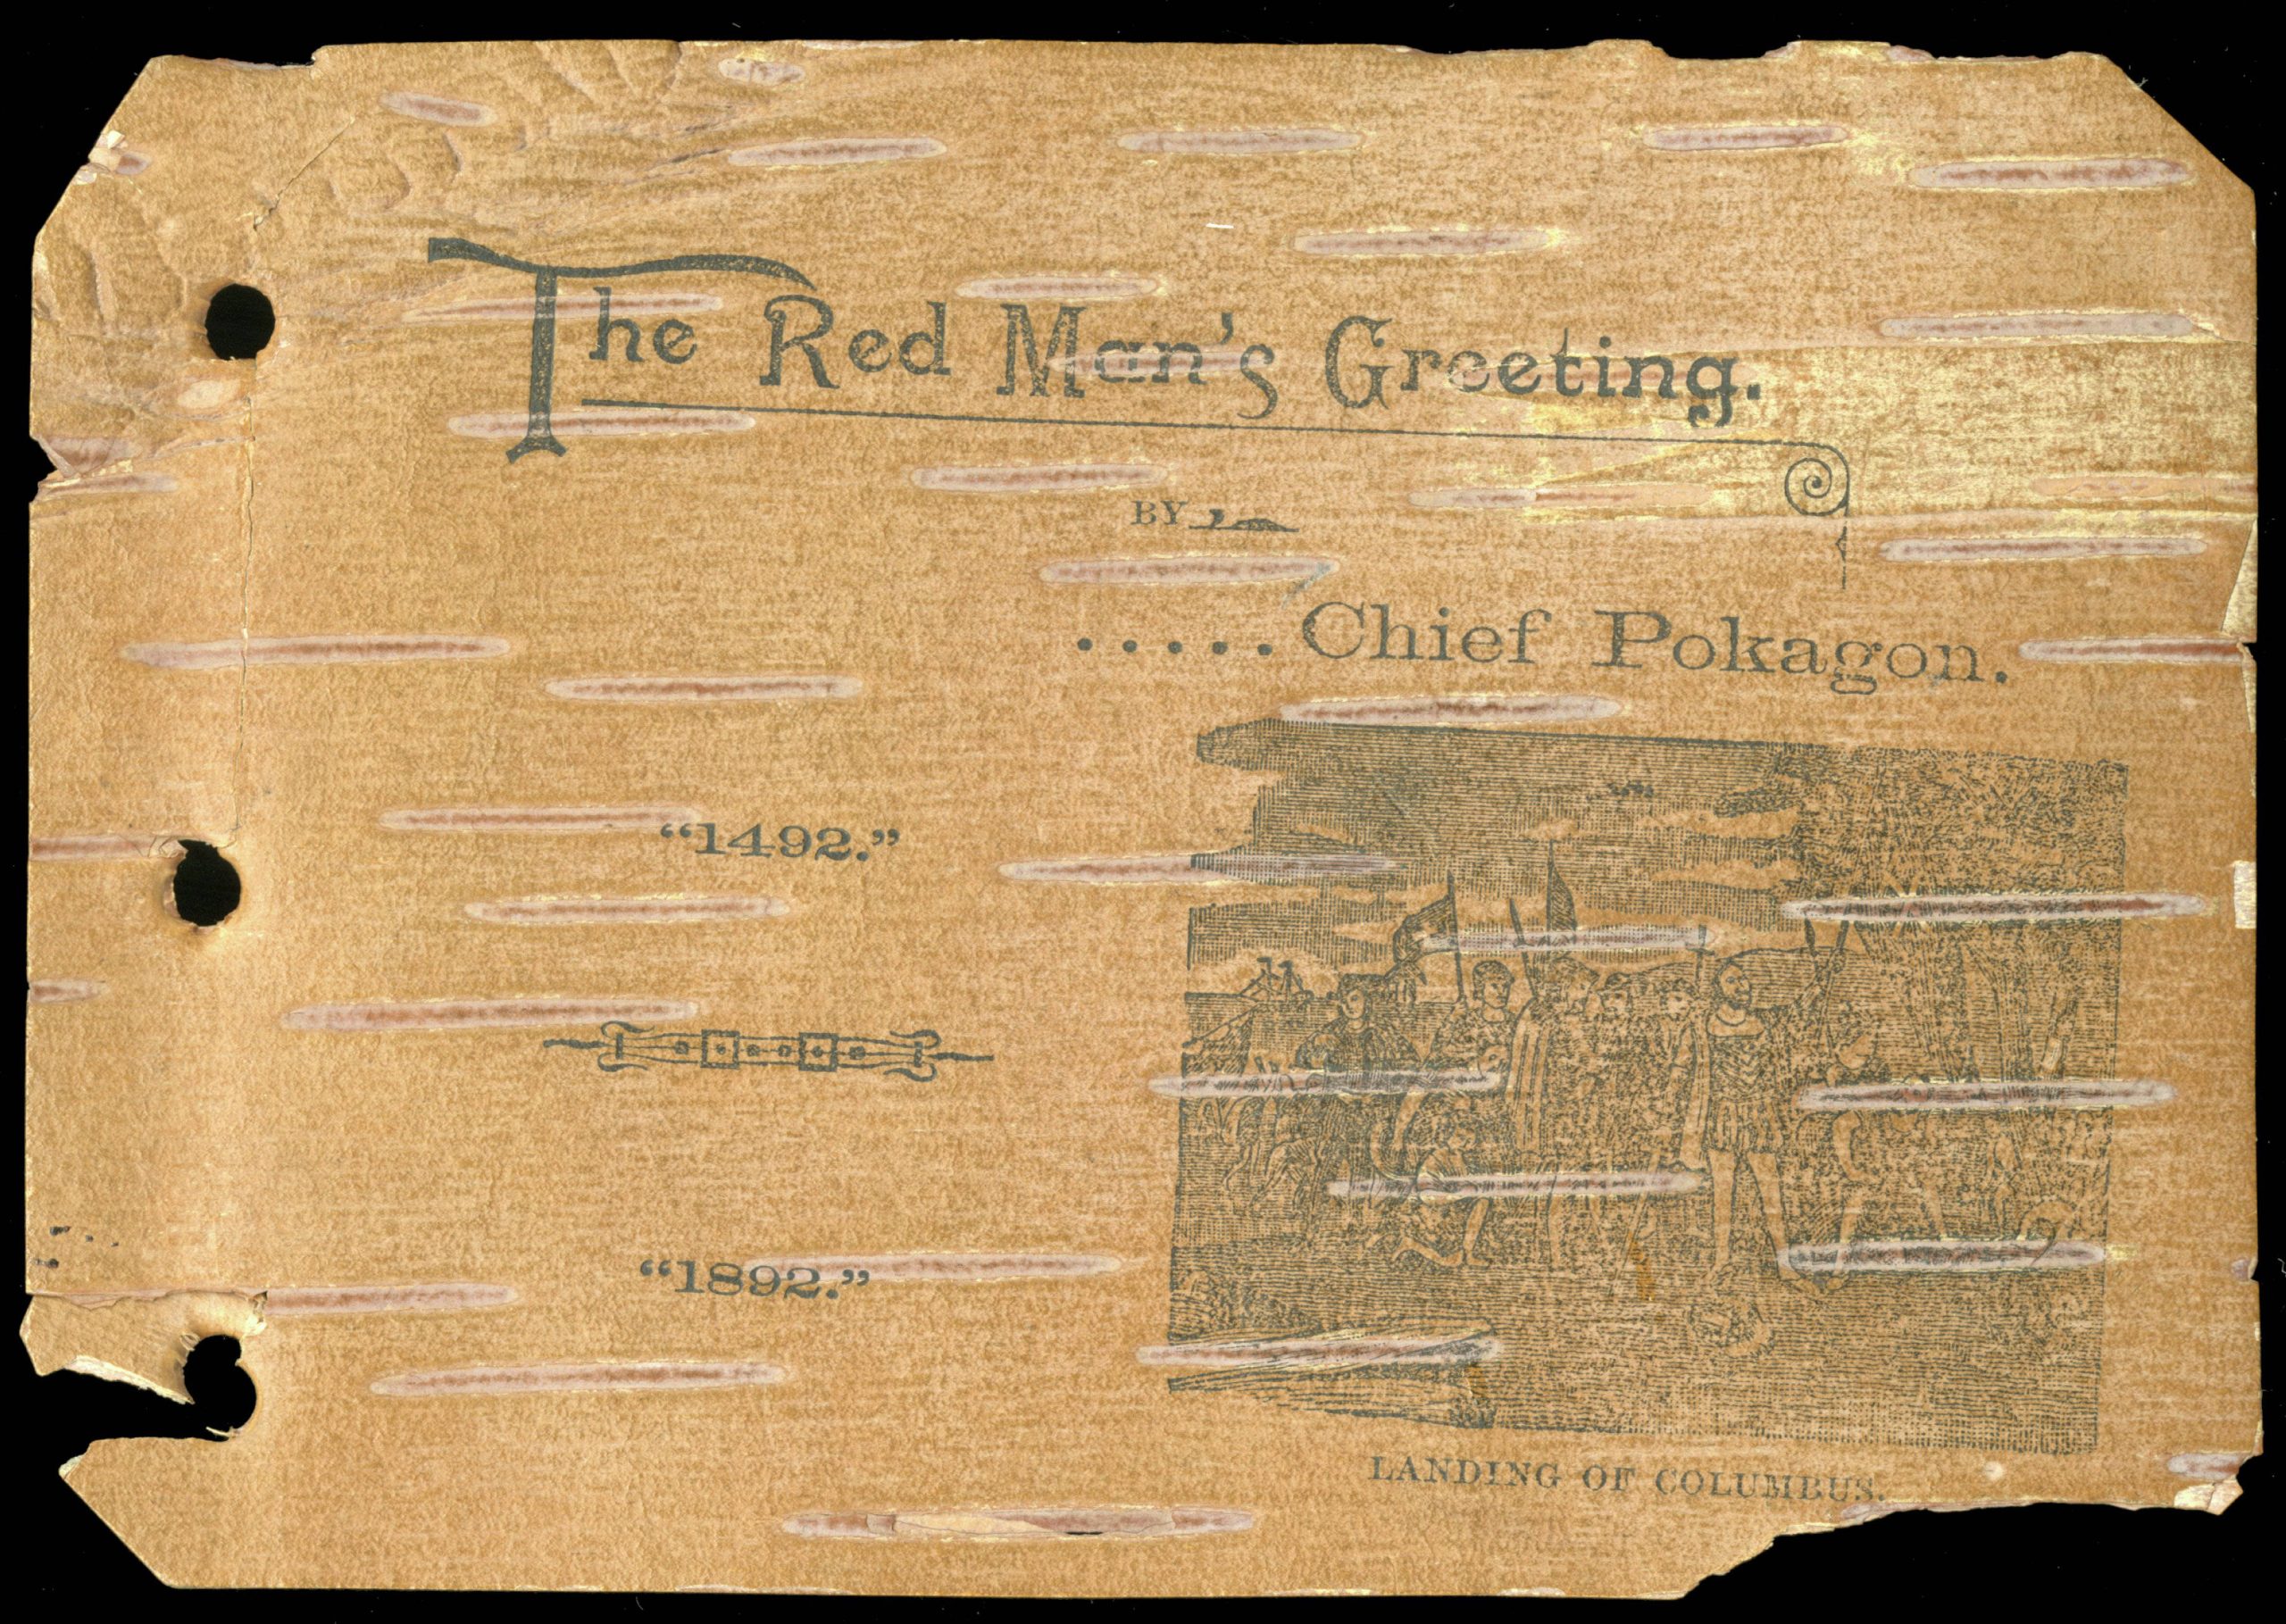 Title page of book printed on birch bark. Title readings "The Red Man's Greeting, 1492-1892 by Chief Pokagon." In the lower right corner is an image of a white man standing on a beach with many other white men behind him. They carry flags and crosses and are disembarking from a boat." The image is captioned "Landing of Columbus."